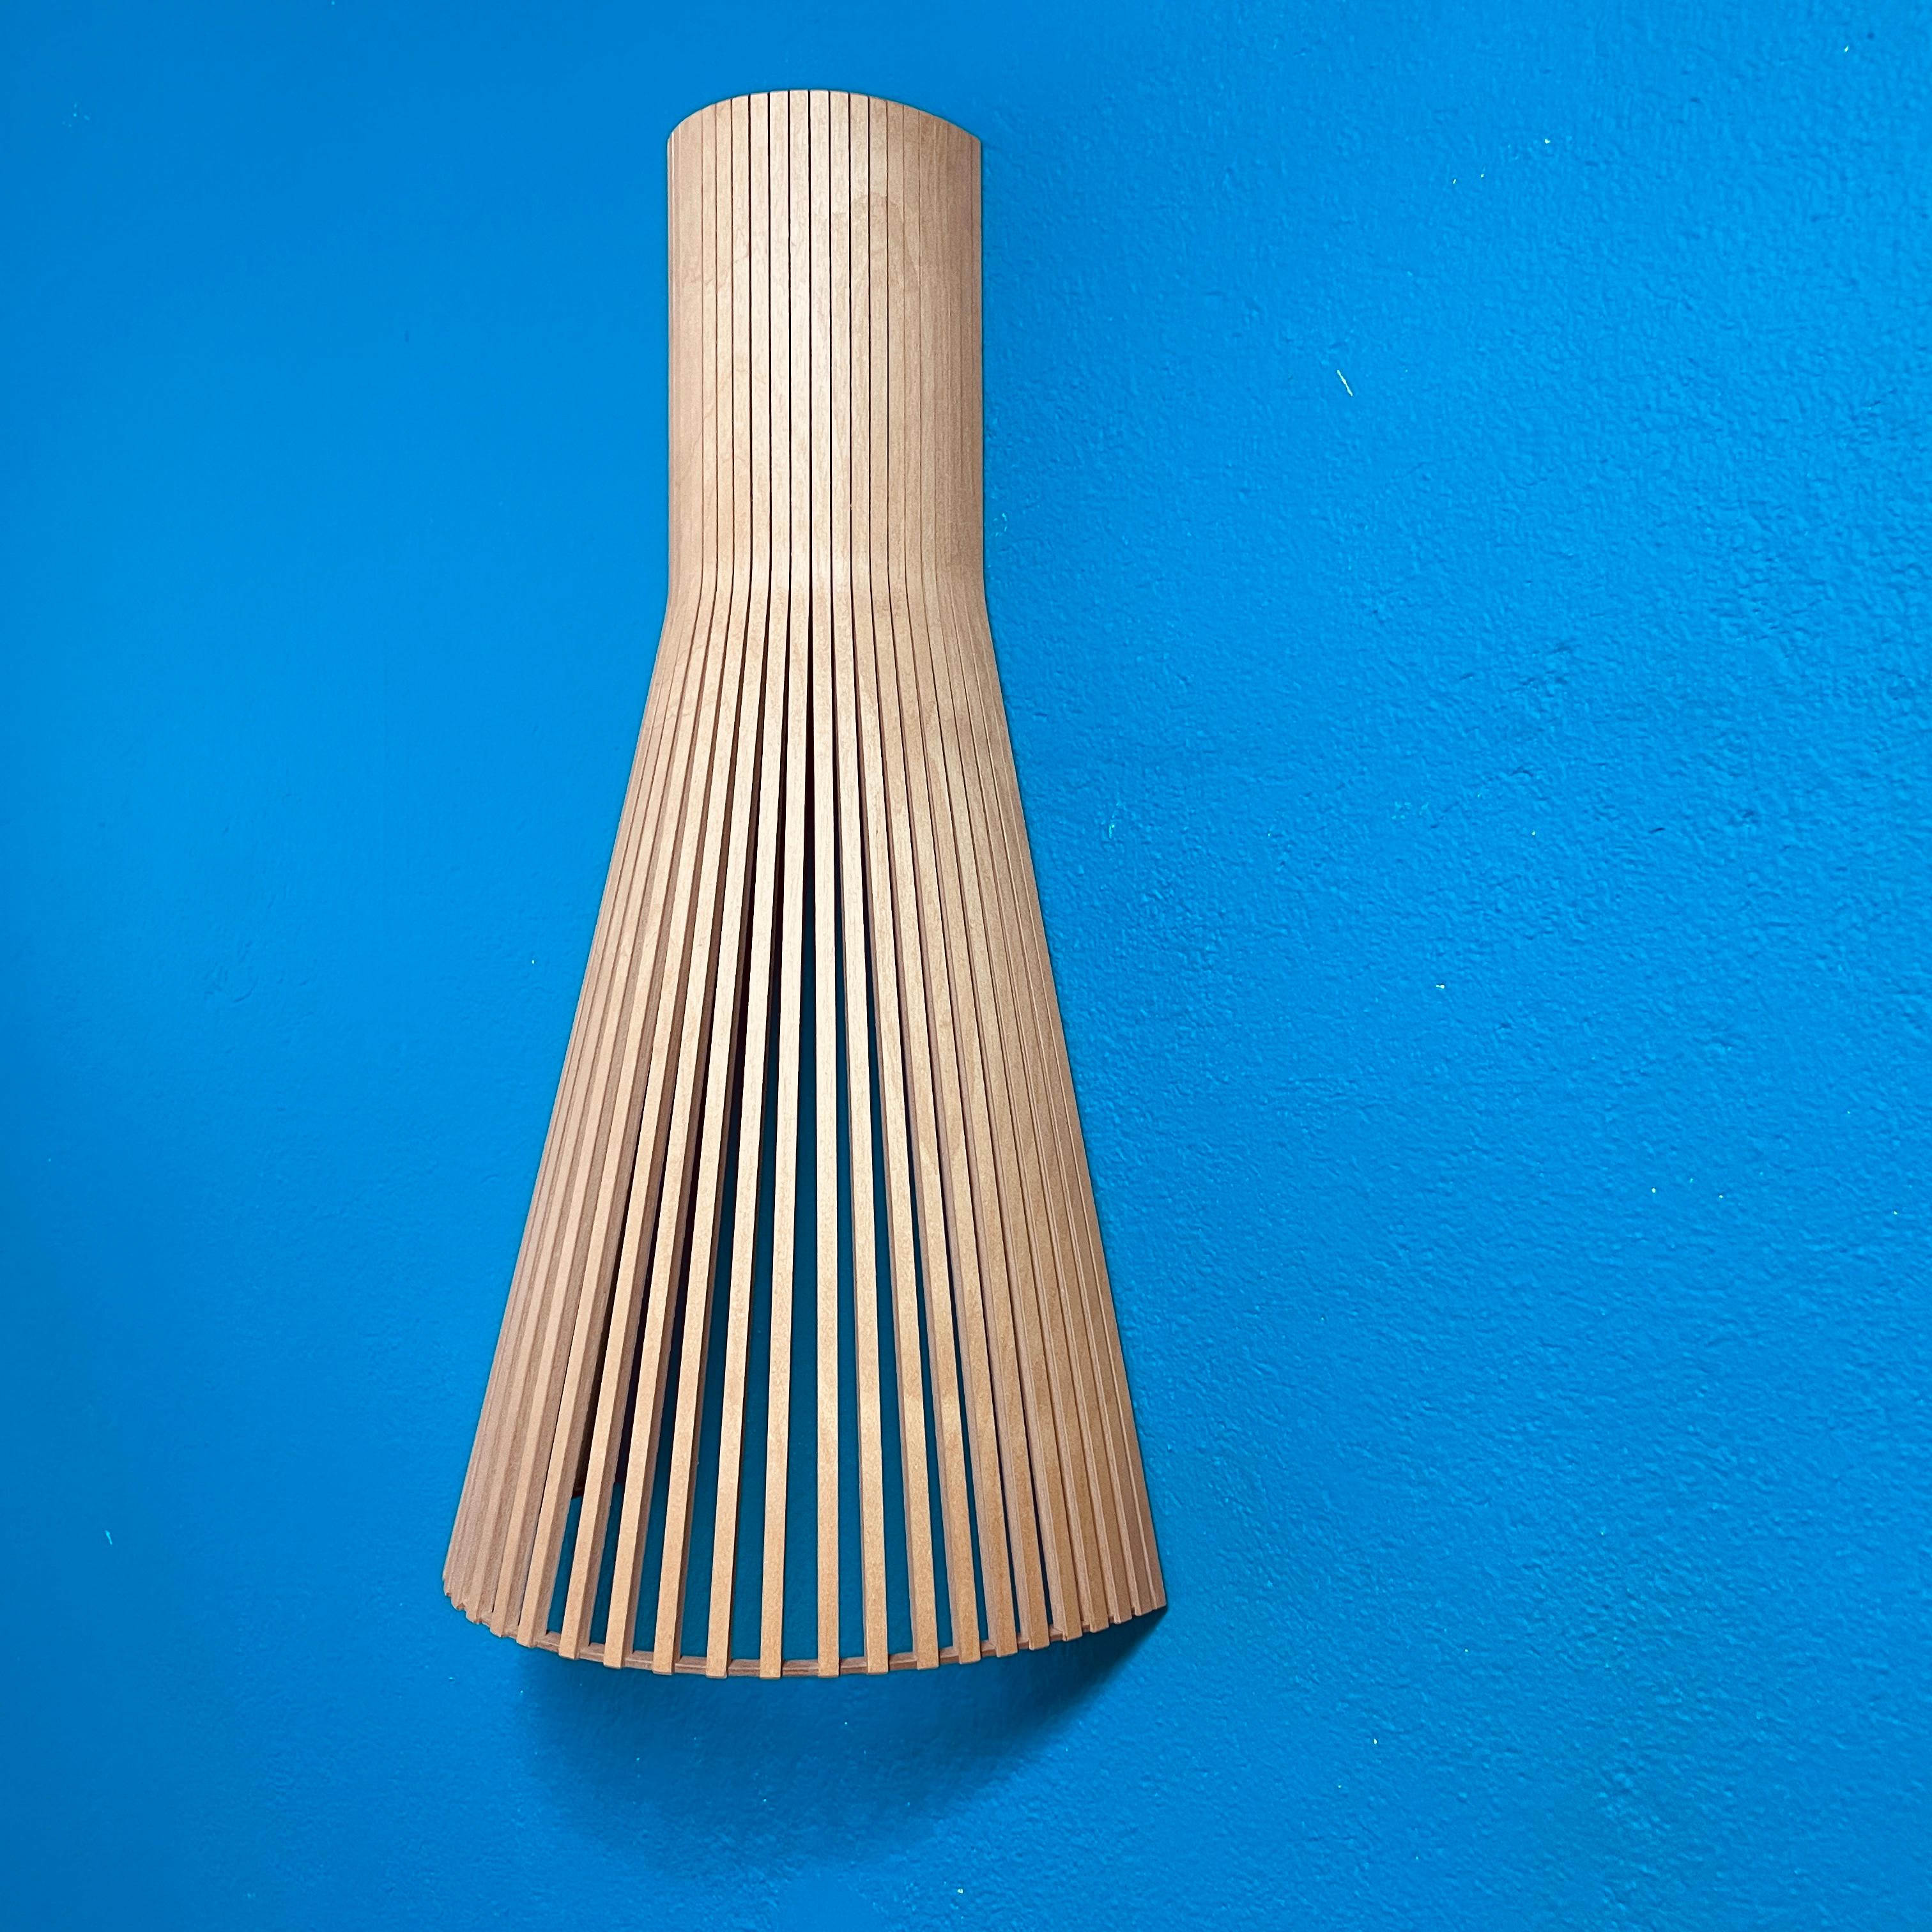 Finnish Pair of Wooden Secto 4230 Wall Lamps by Secto Design Finland